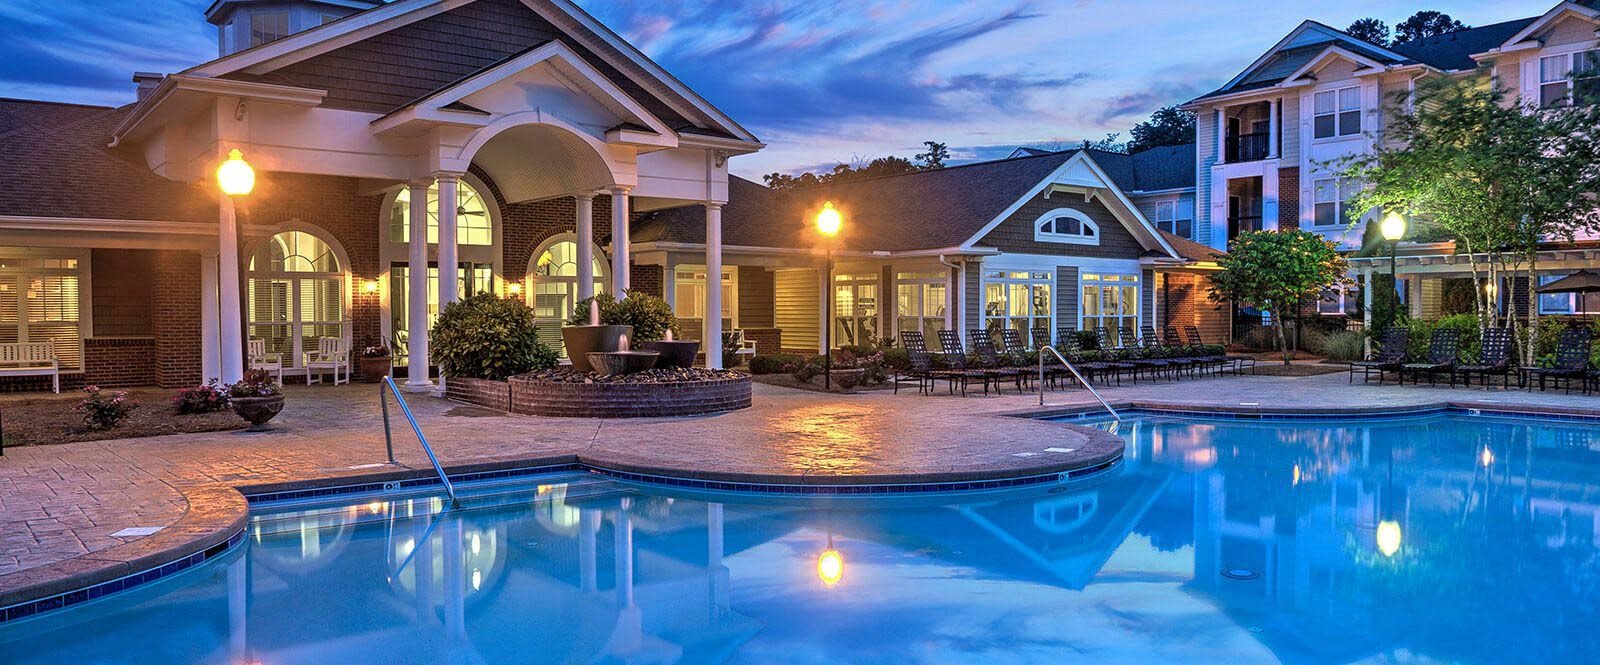 Great pool views from many of their apartments at Abberly Woods Apartment Homes by HHHunt, North Carolina, 28216